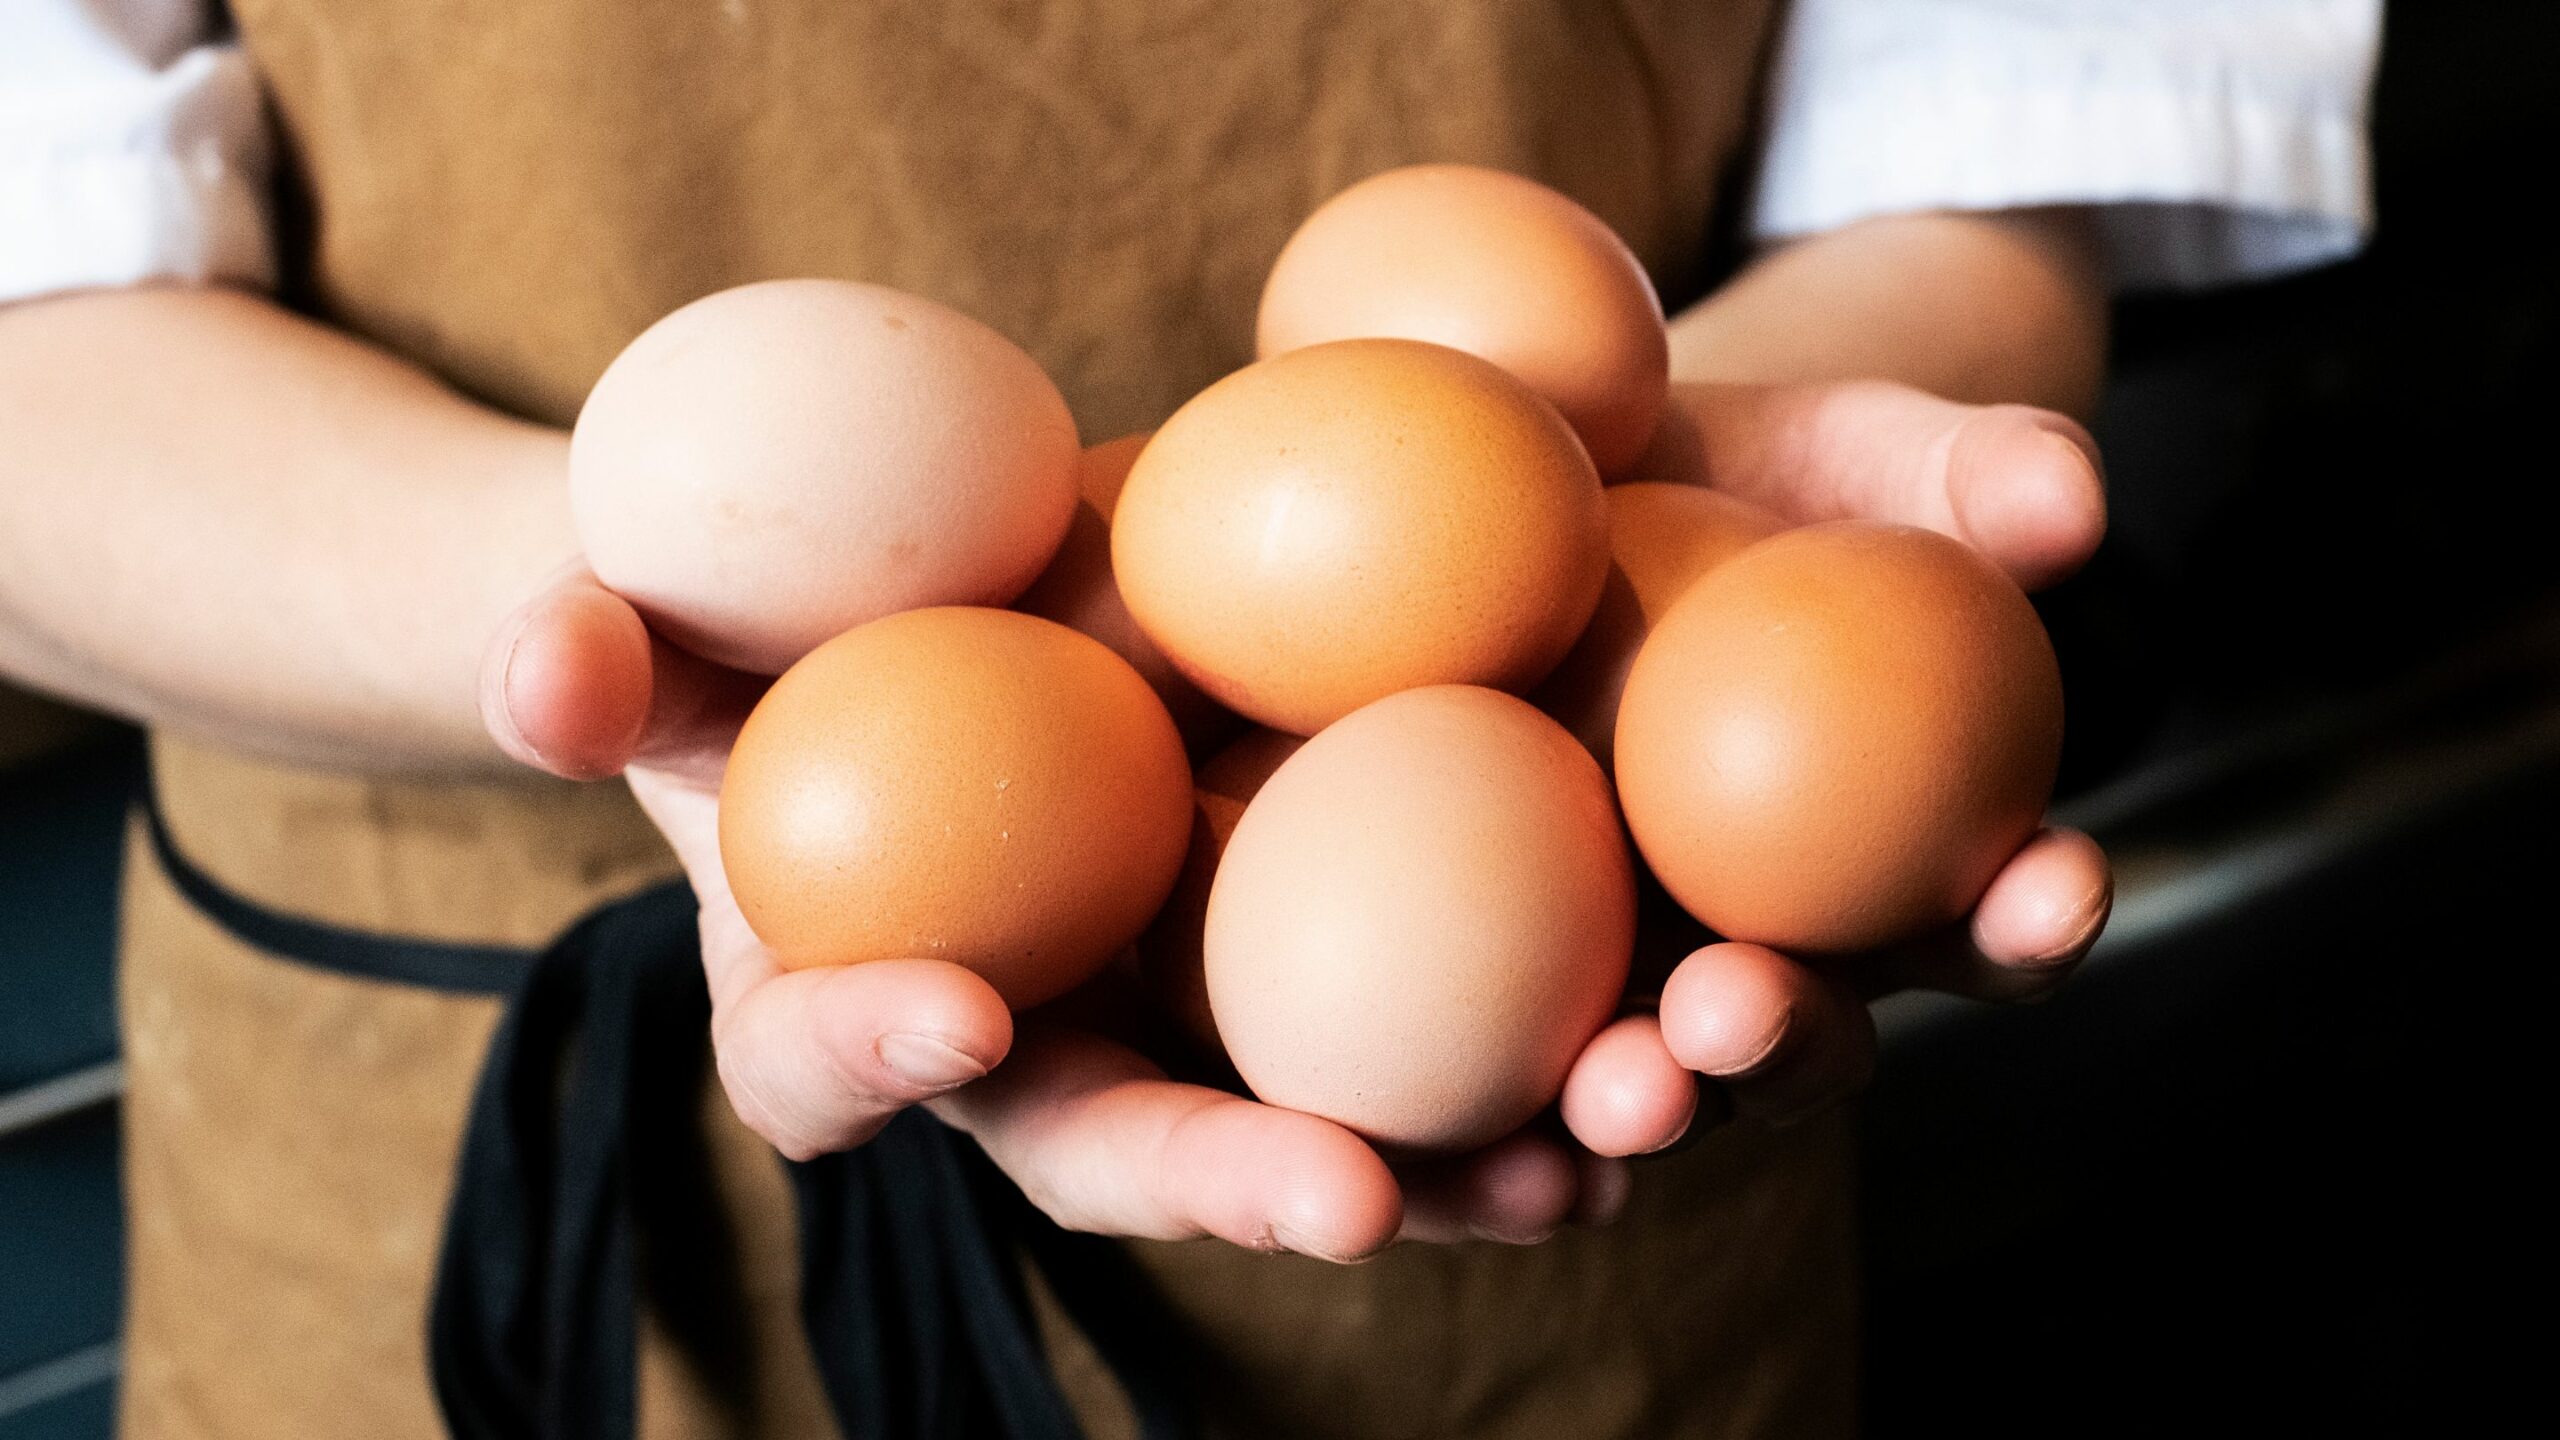 We continue to strengthen our commitment to acquire Cage-Free eggs